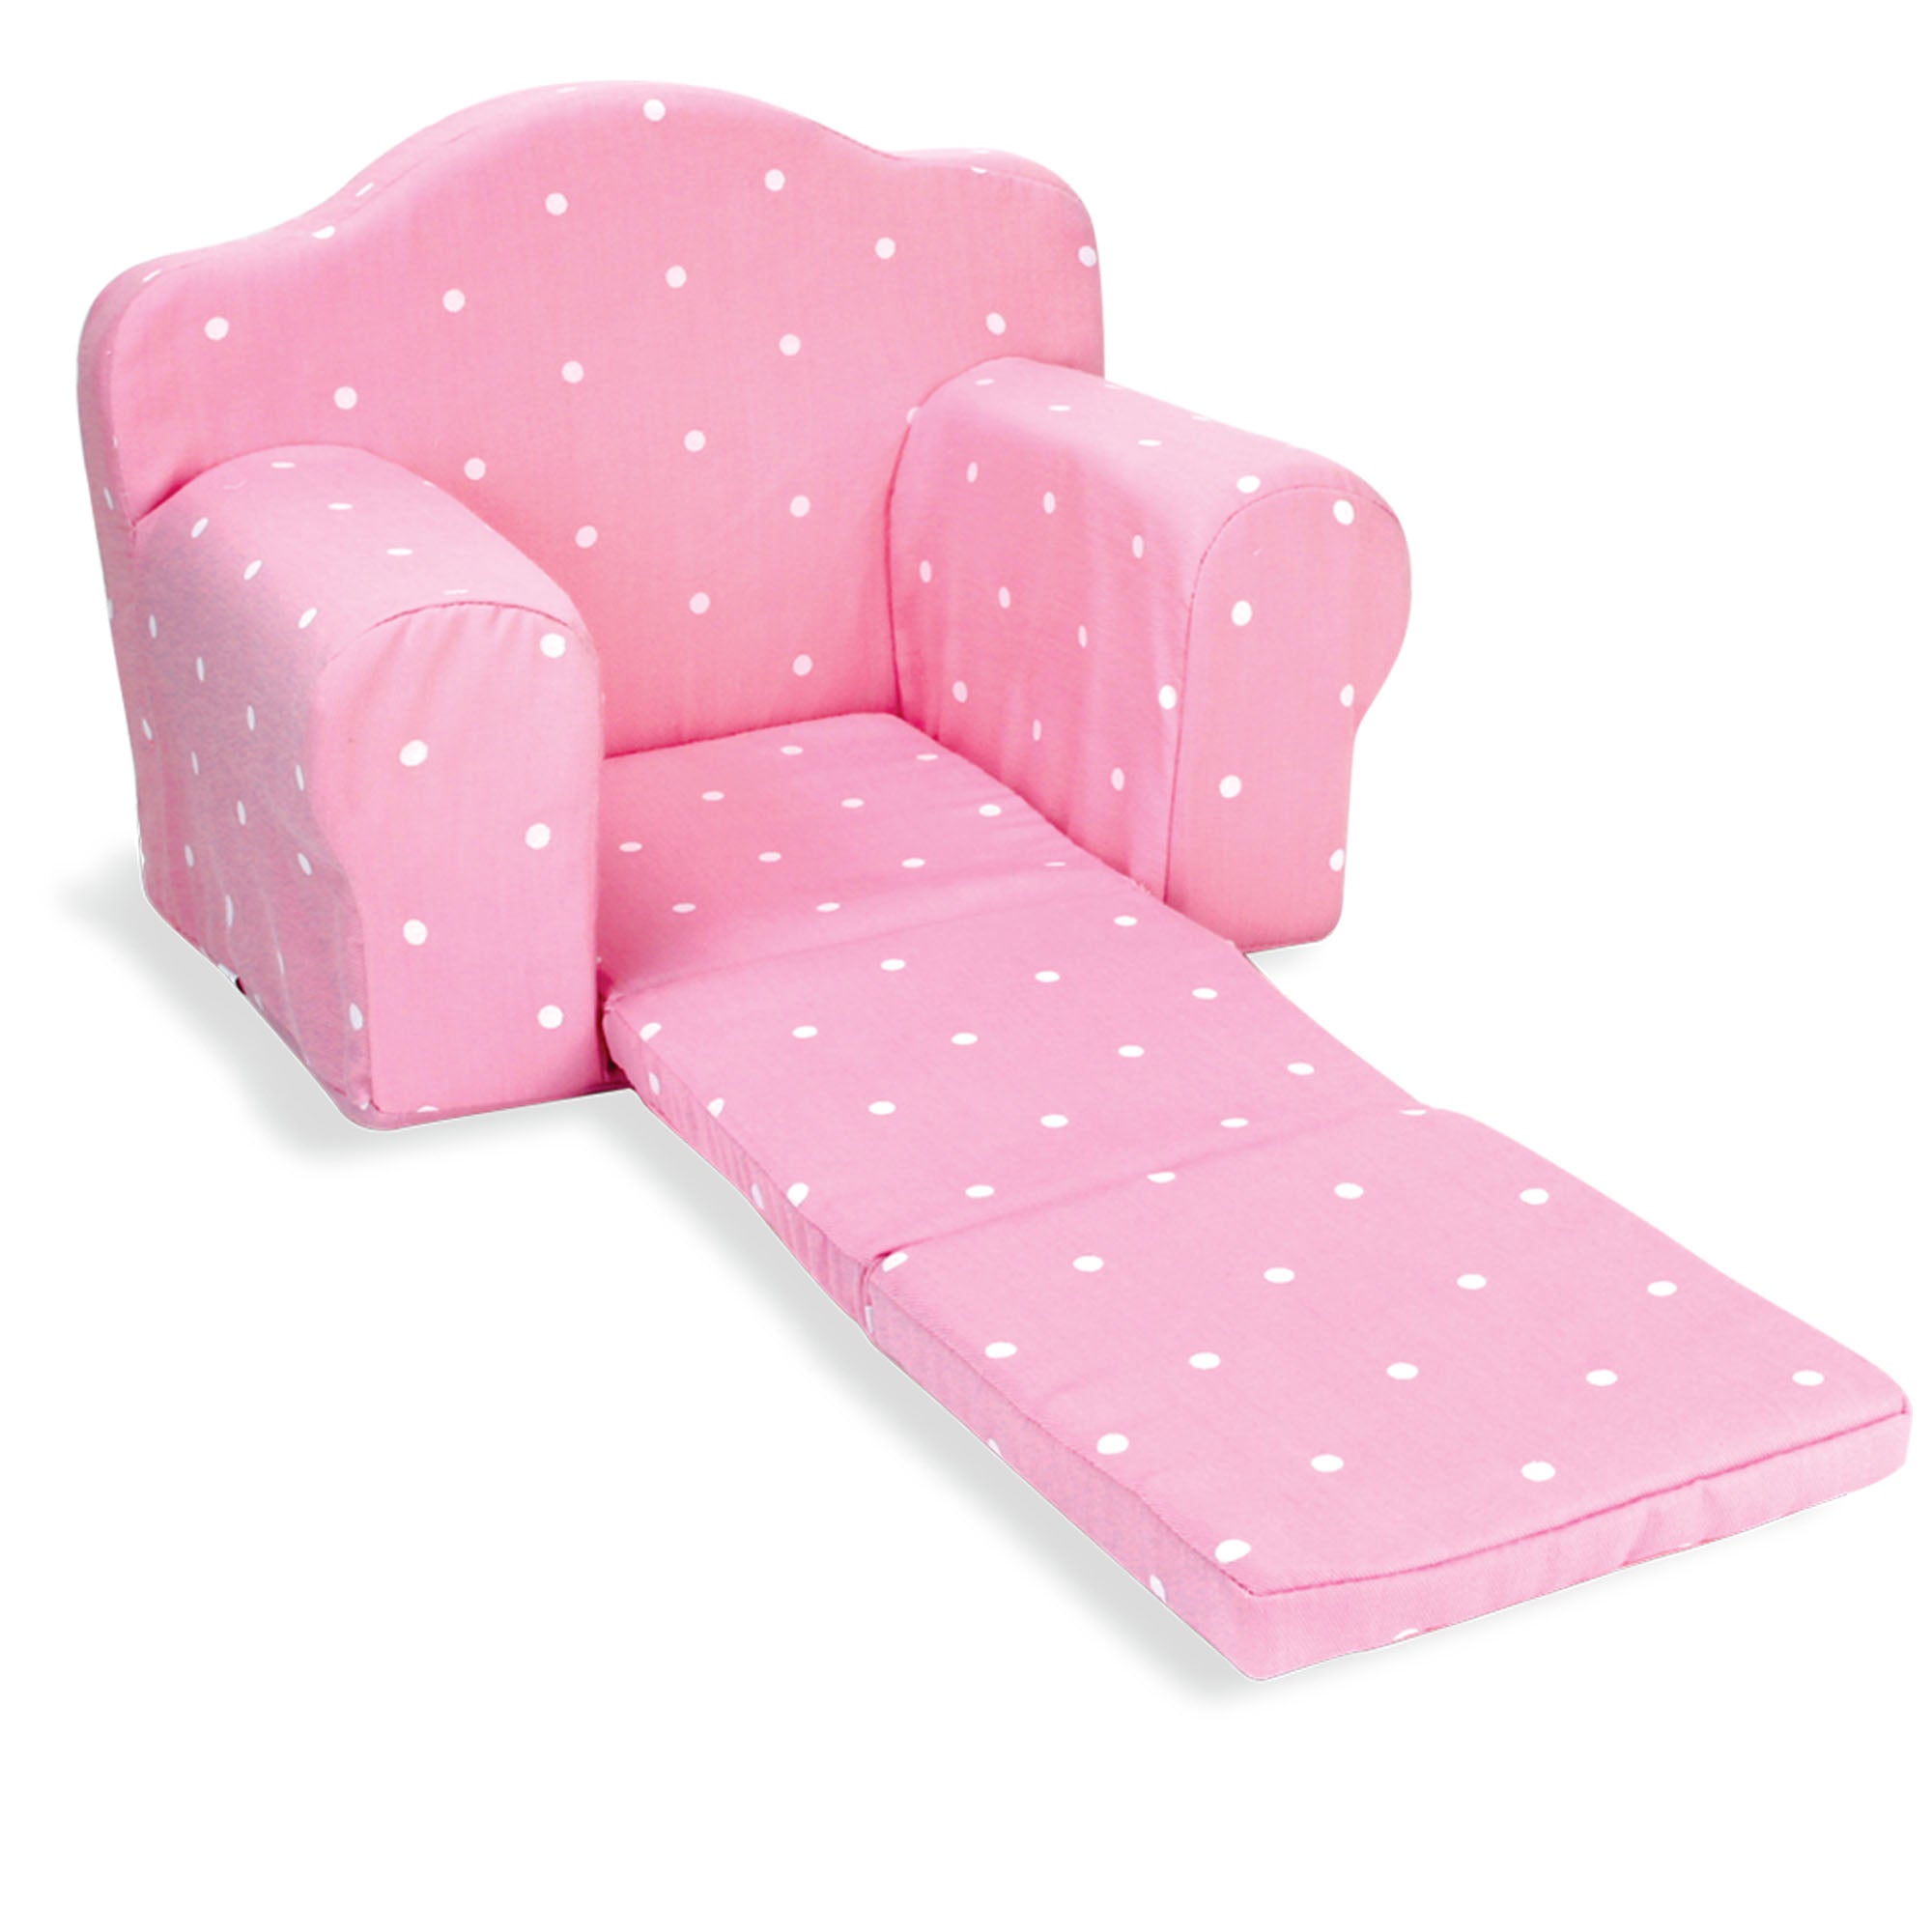 Sophia's - 18" Doll - Polka Dot Pull Out Chair Single Bed - Light Pink